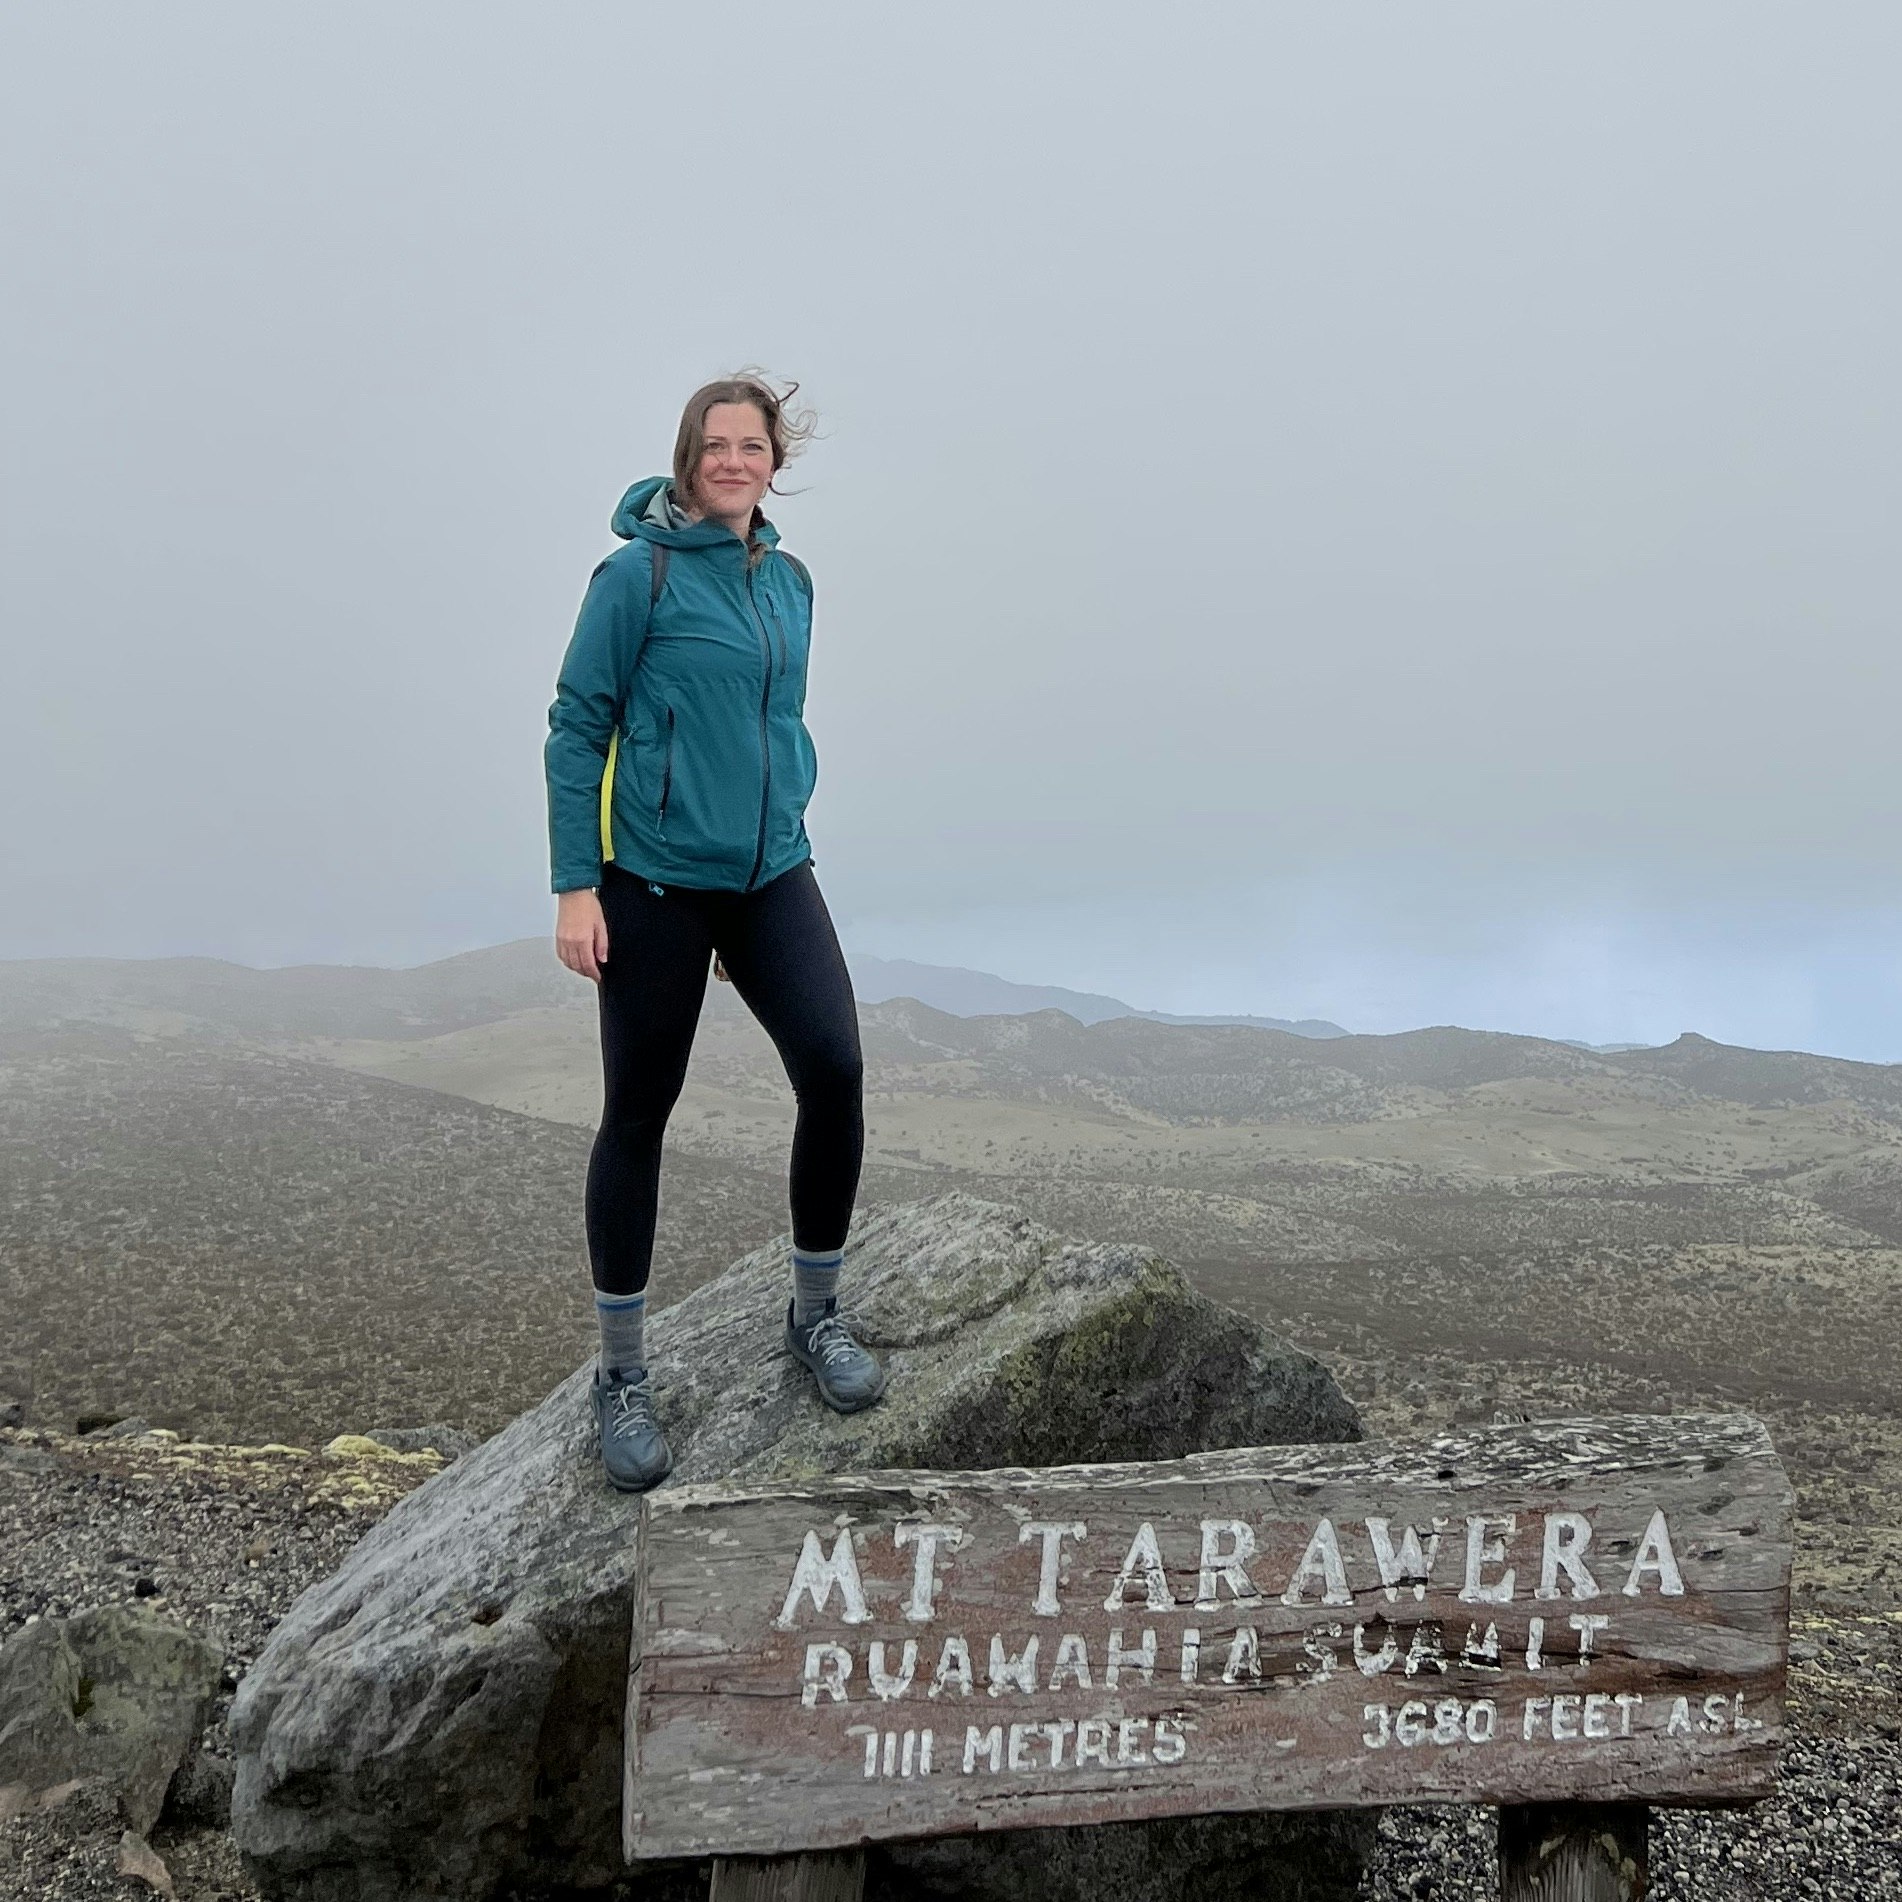 Jessica Lockhart in New Zealand, standing on a rock behind a wooden sign marking the summit of Mt Tarawera